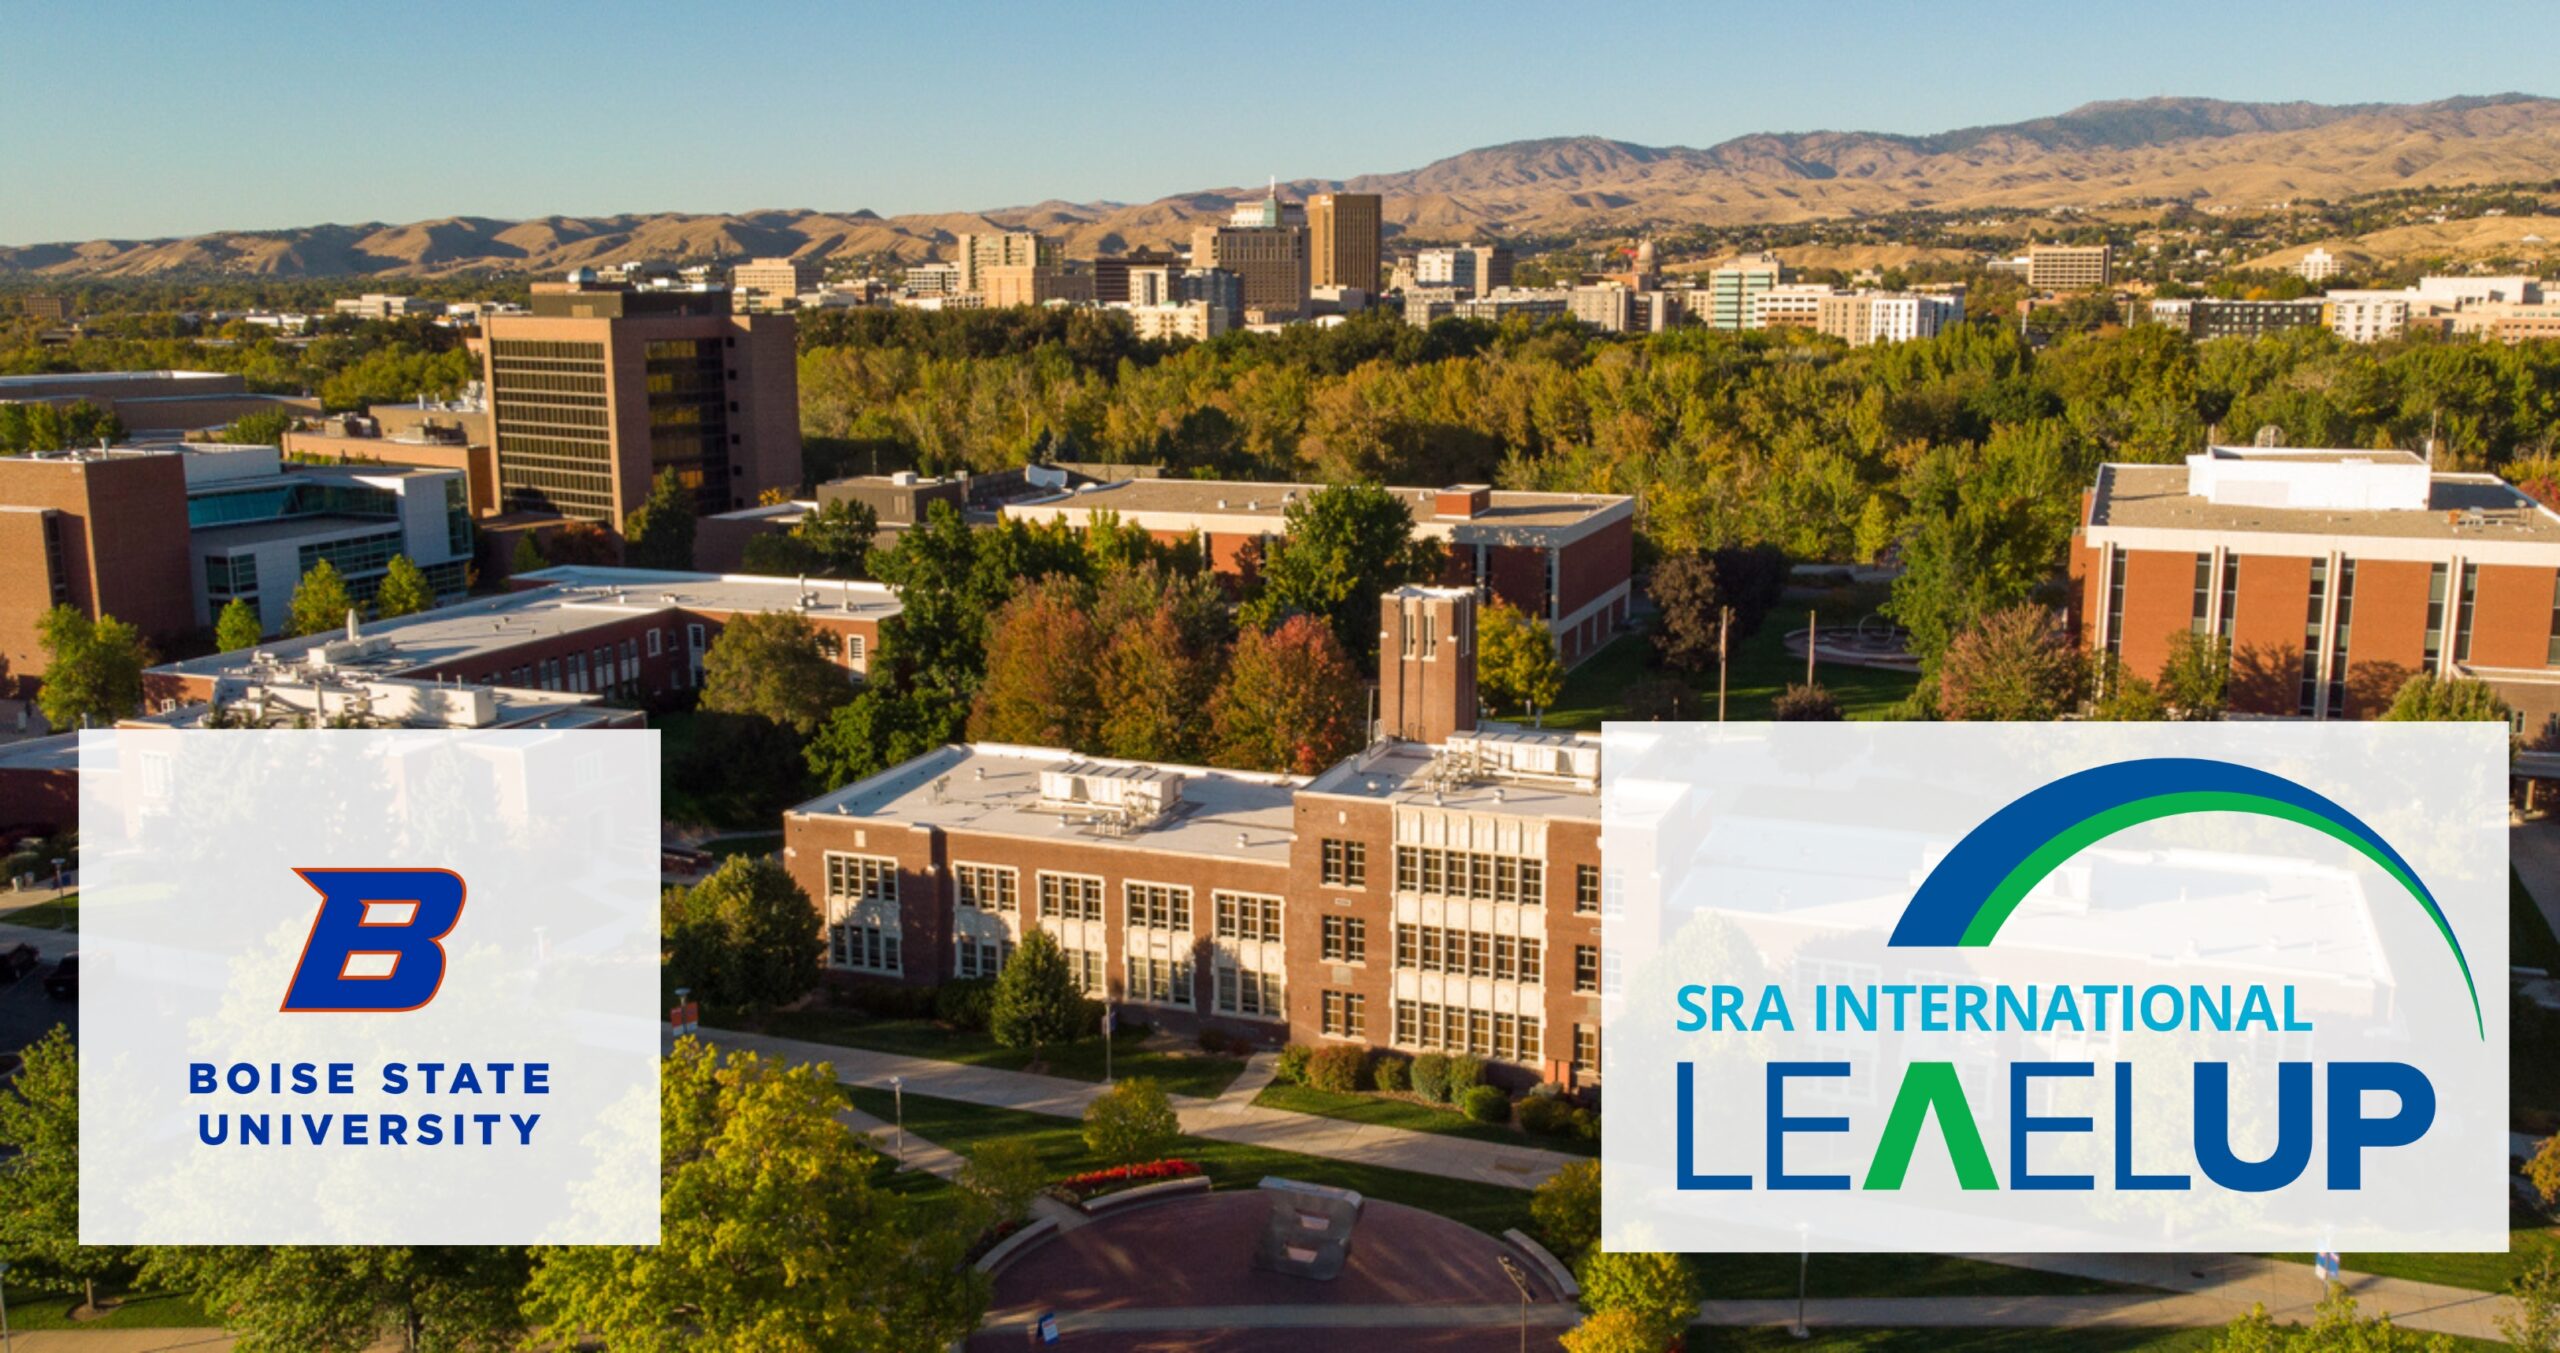 An image of the Boise State University Campus with Boise State Logo and LevelUp logo over the image.